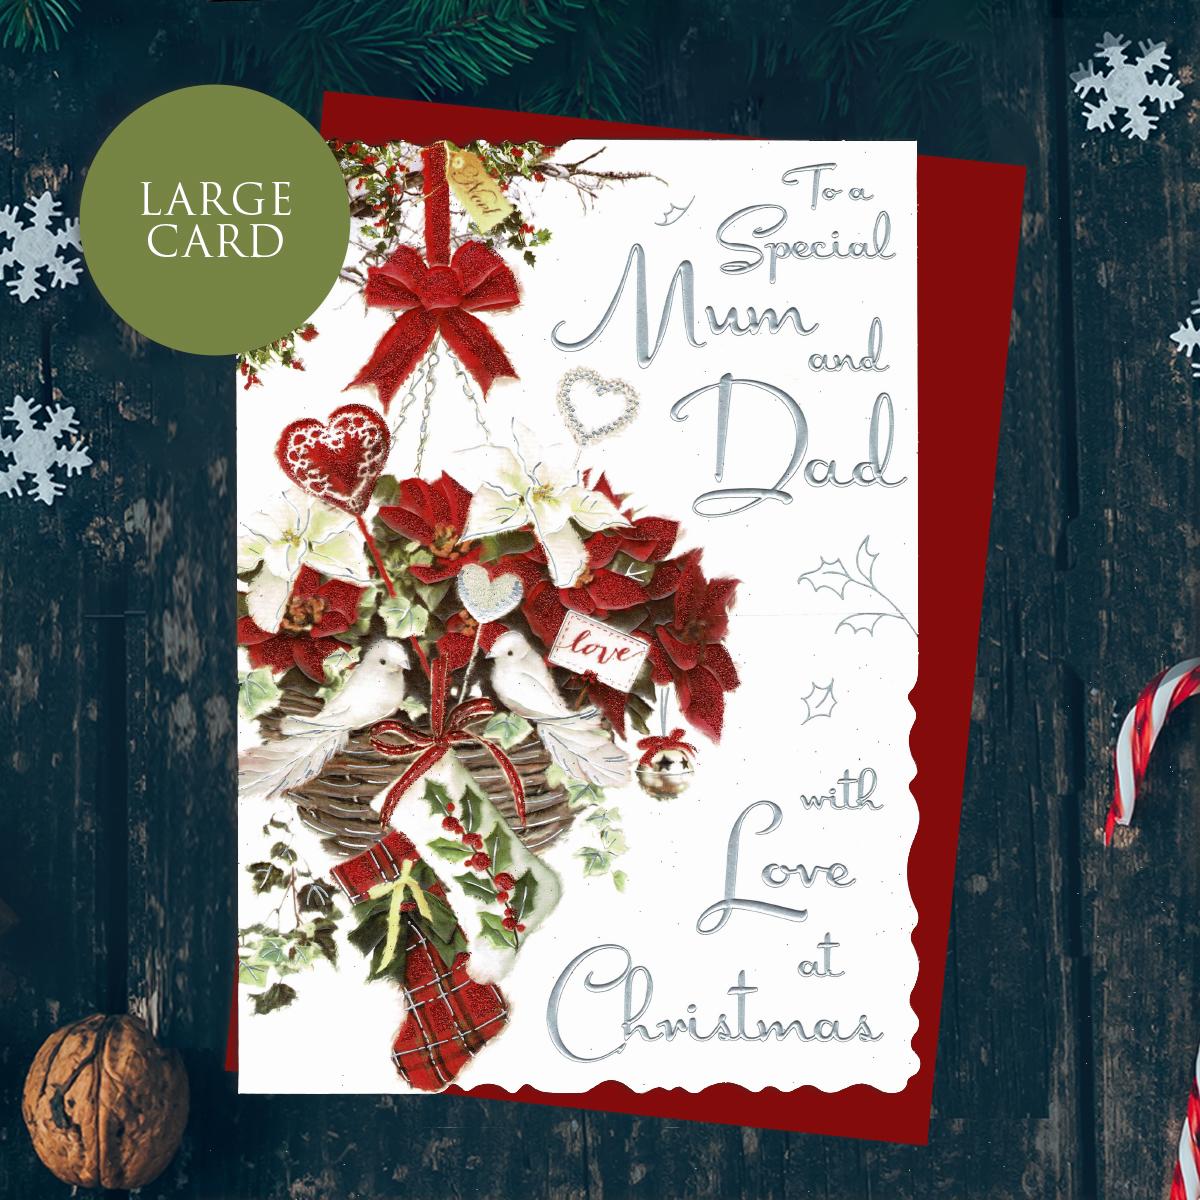 To A Special Mum And Dad With Love At Christmas Featuring A Decorated Dove's Nest With Ribbons, Baubles And Stocking. Finished With Silver Foiled Lettering, Red Glitter And Printed Colour Insert